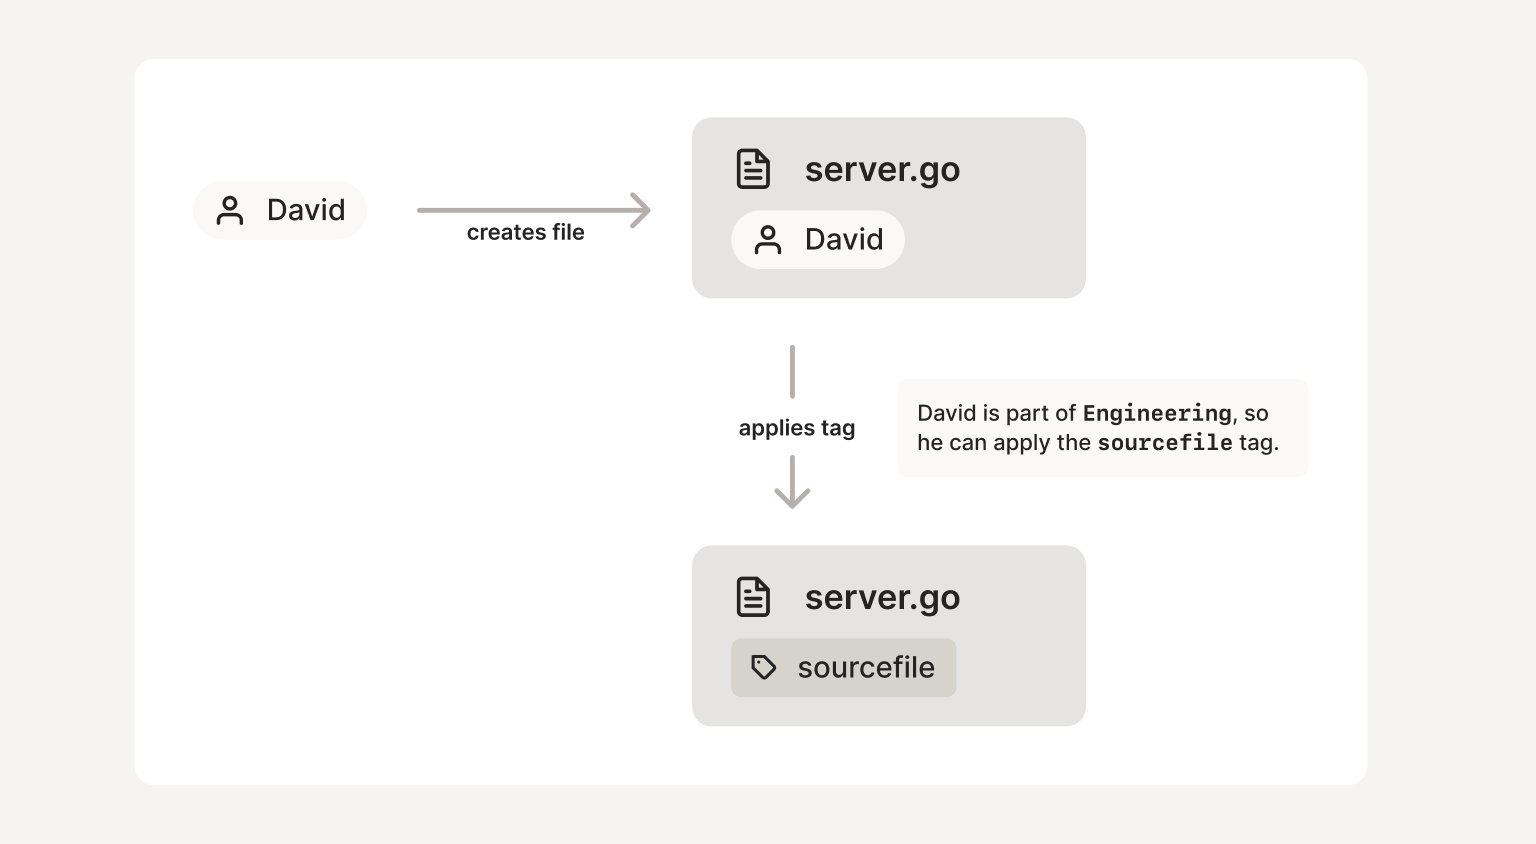 A diagram demonstrating a user creating a file. Upon creation, the file is owned by the user. Because the user is part of the Engineering group, he is able to apply the 'sourcefile' tag which causes the file to inherit the permissions associated with that tag.